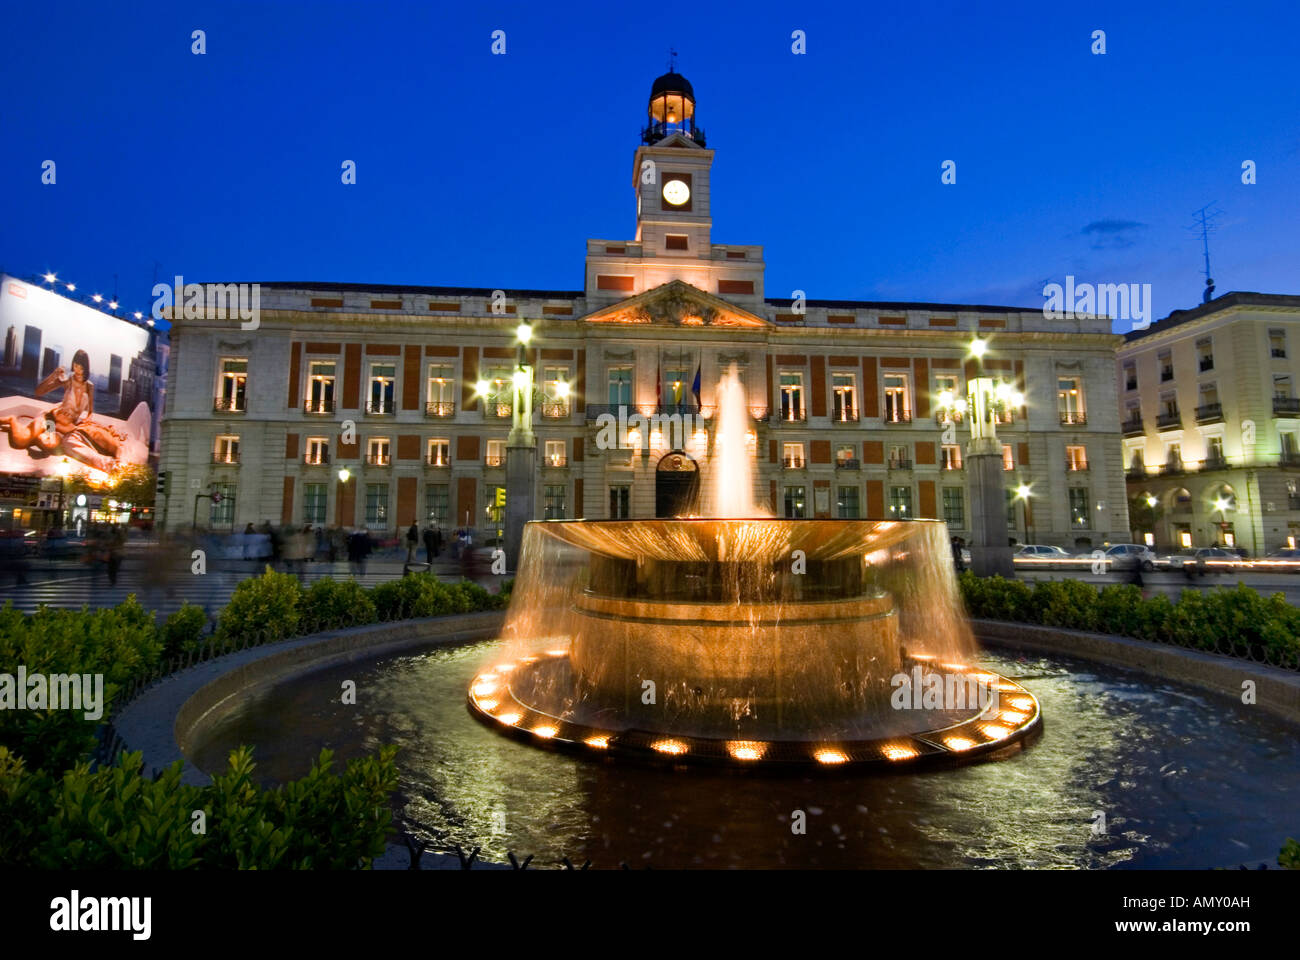 Fountain in front of building lit up at night, Puerta Del Sol, Madrid, Spain Stock Photo